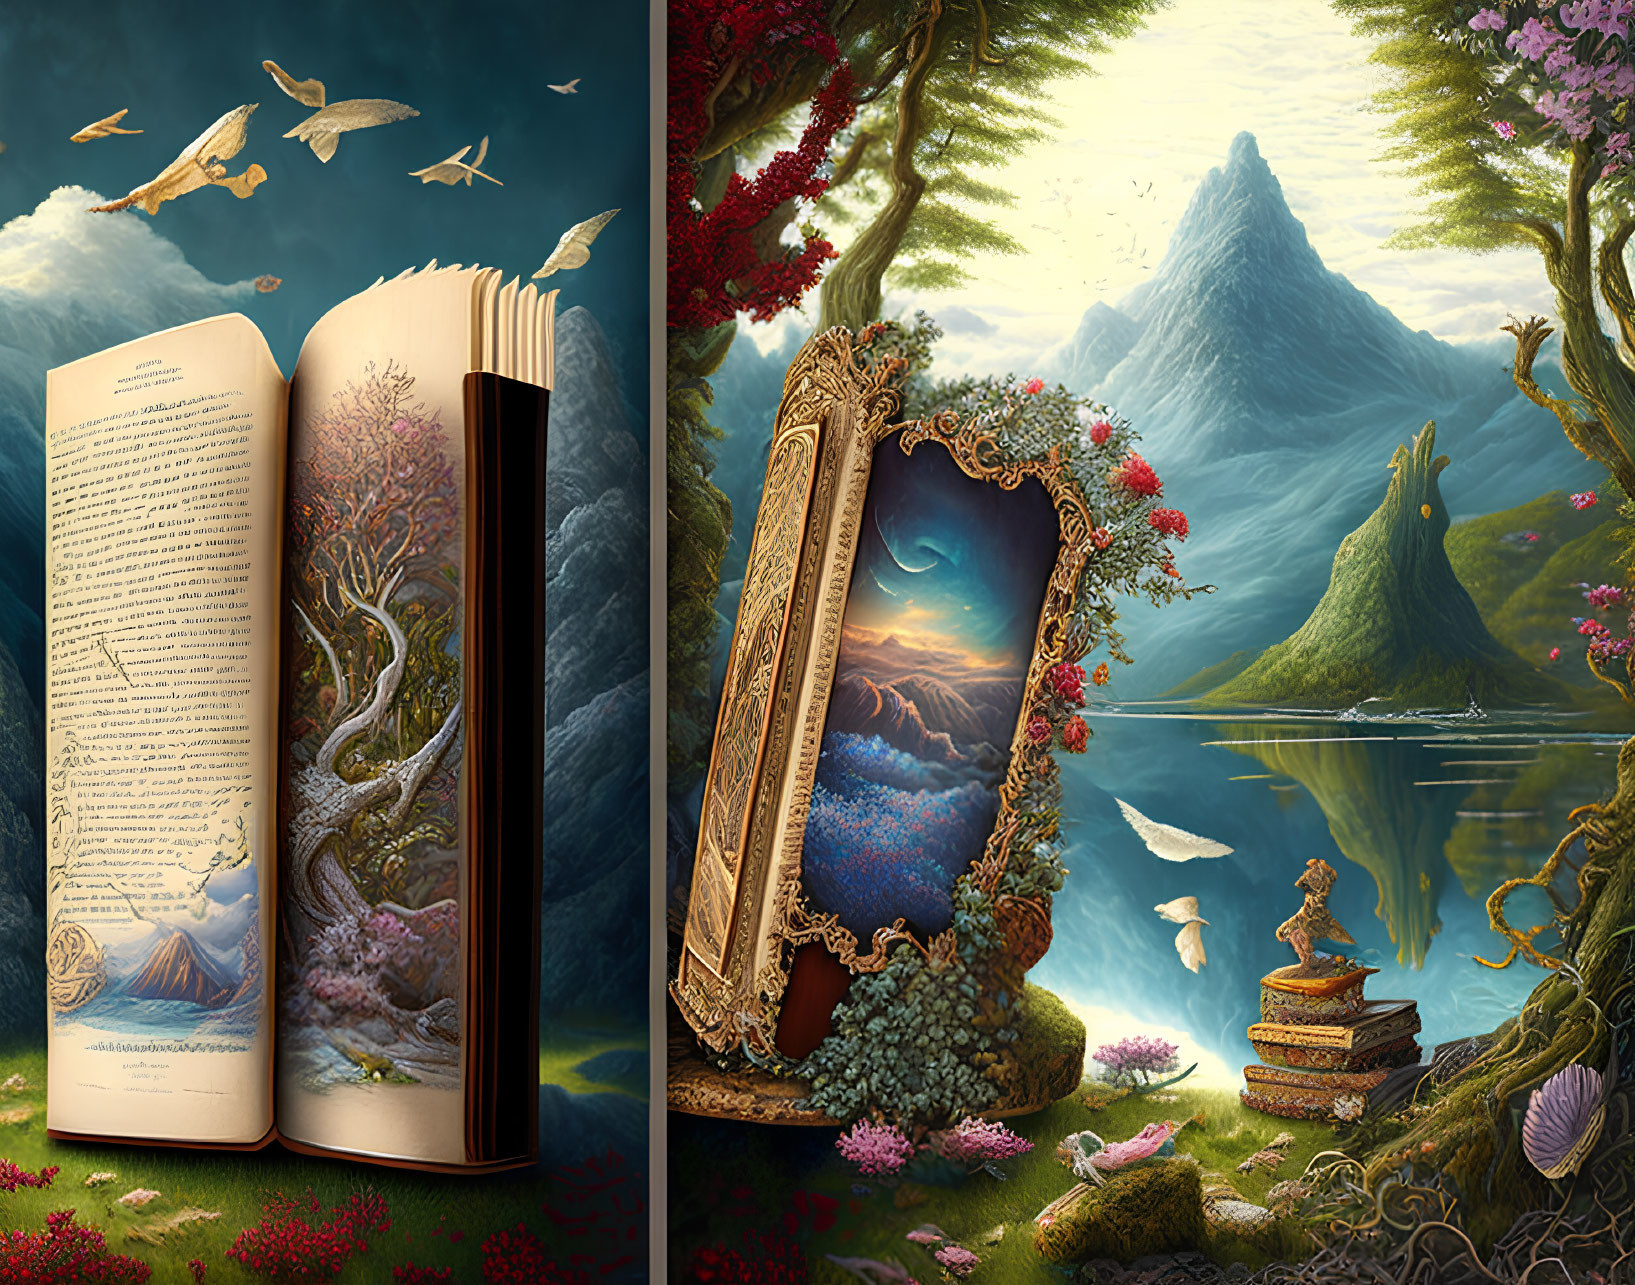 Open book with nature scene & mirror reflecting mountain landscape surrounded by flora and fauna